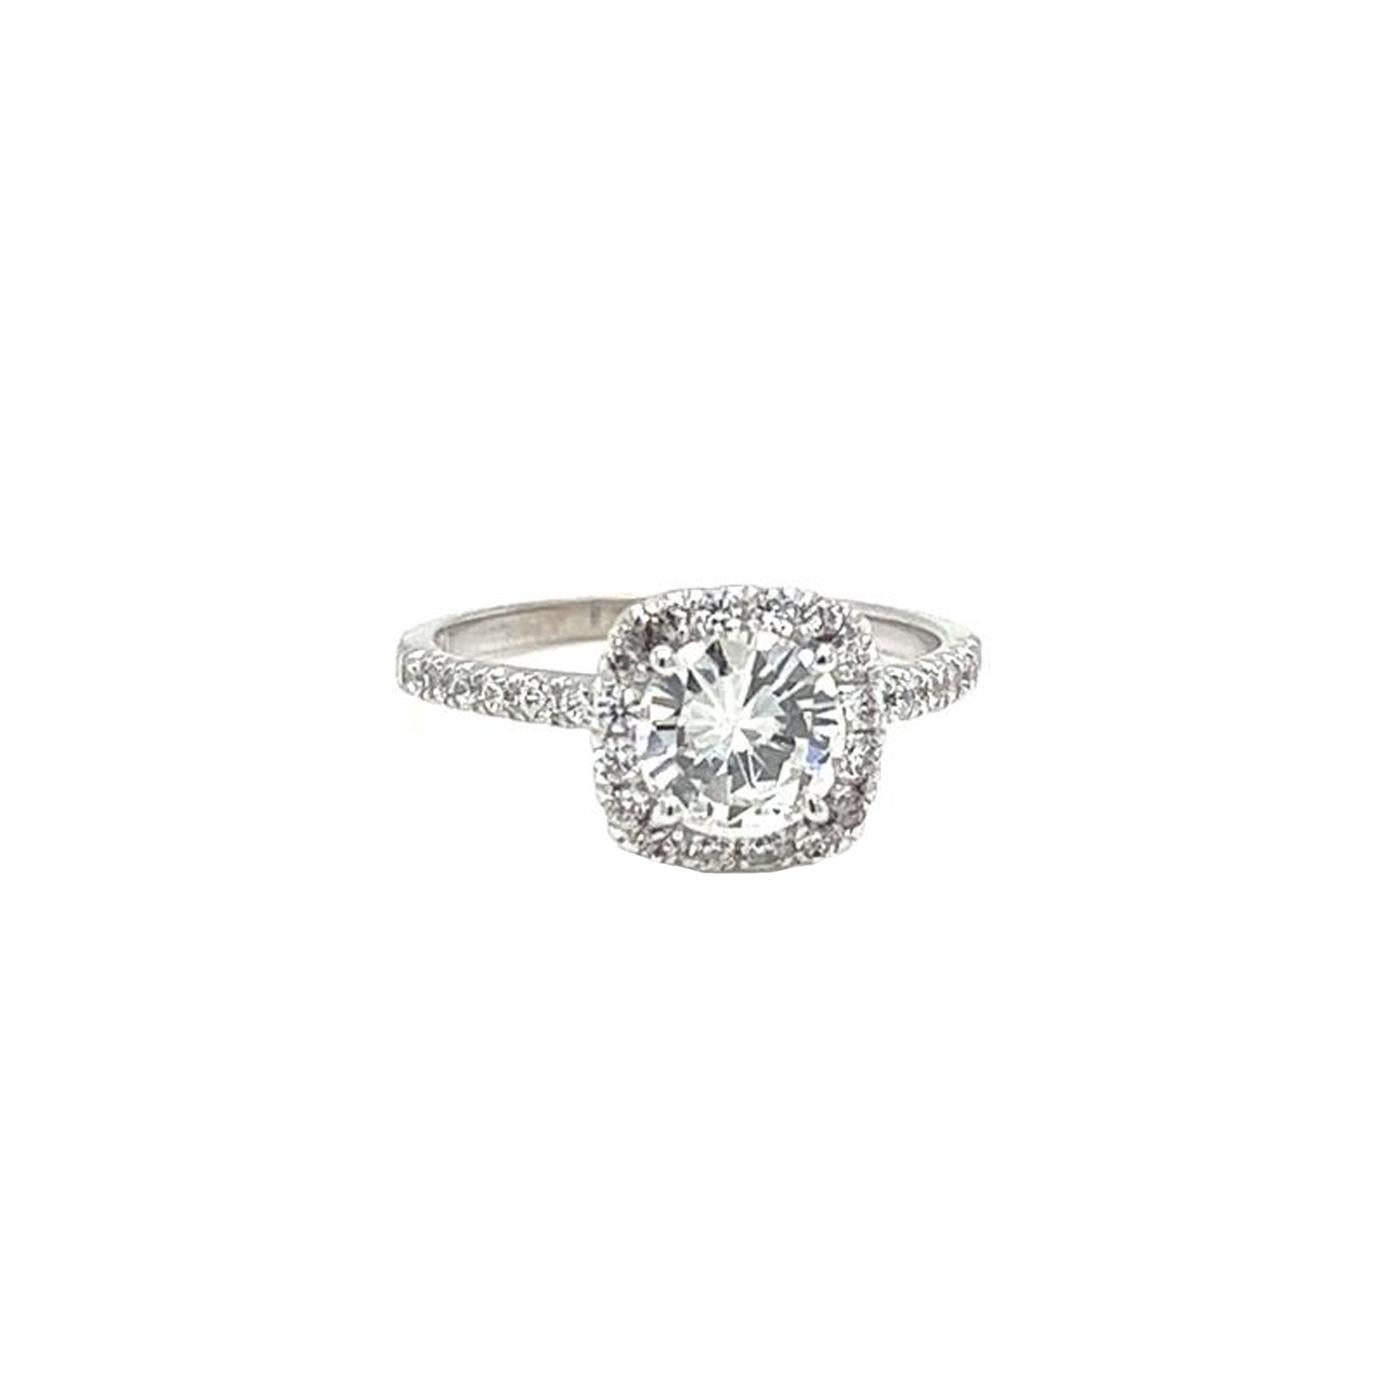 This lovely round-pave diamond Engagement Ring is the definition of understated elegance. Having a Round Diamond with Pave Diamonds lets you display larger areas of your diamond, which allows for maximum light return and showcases its exceptional